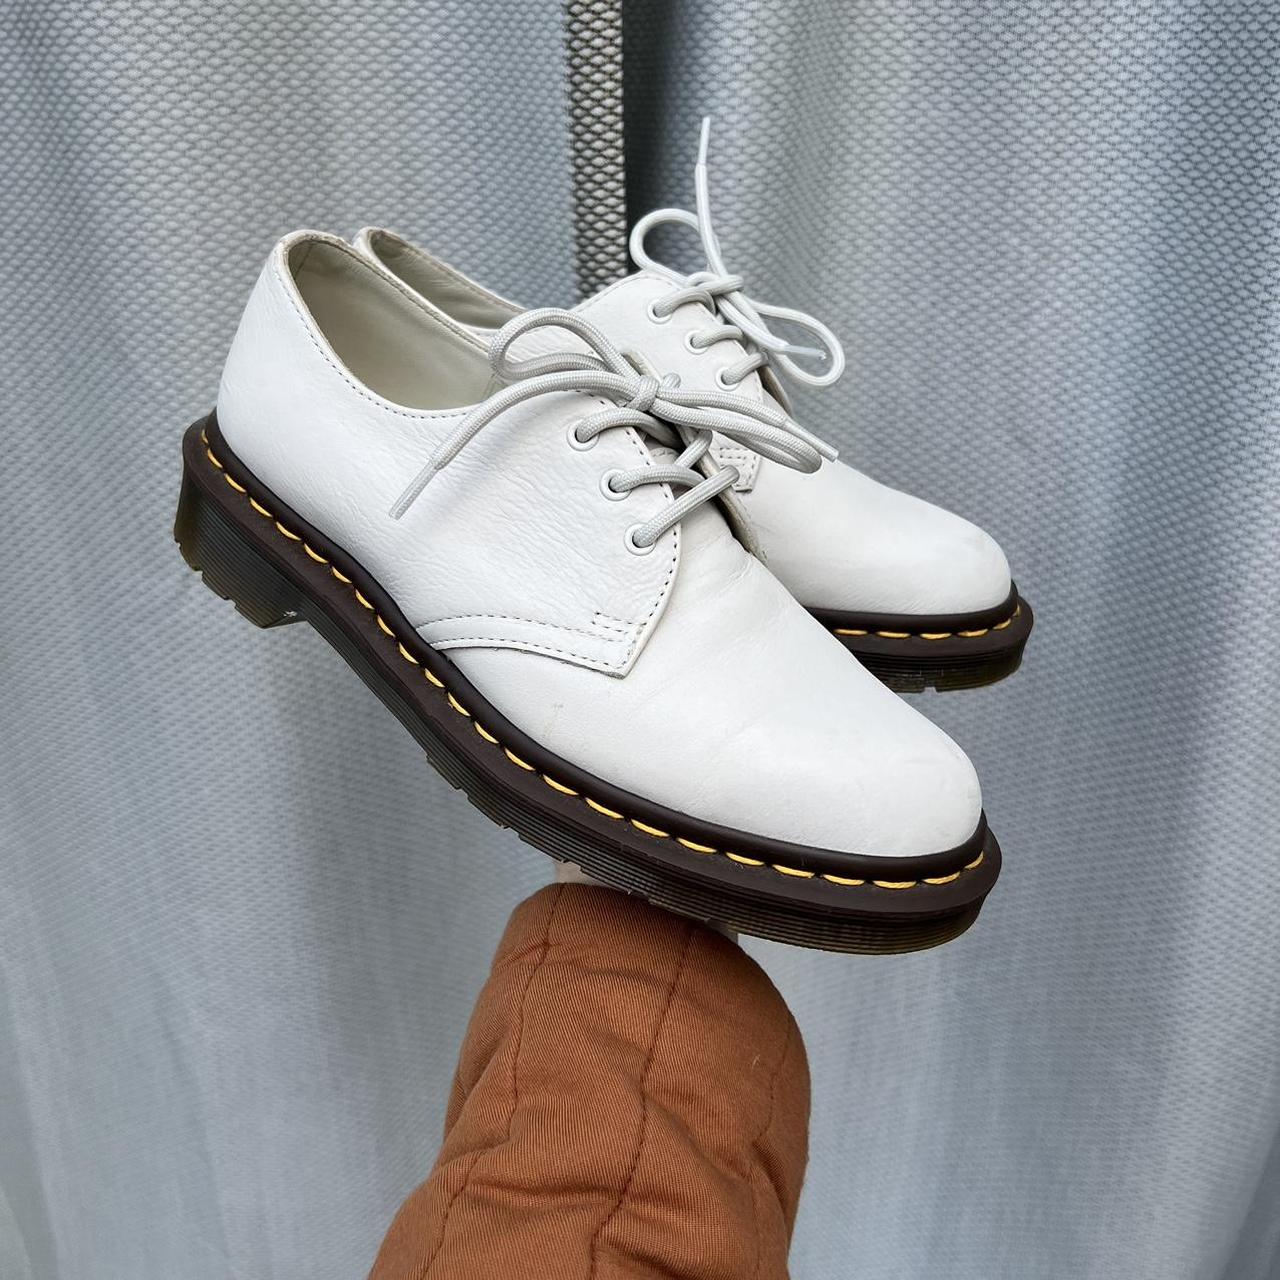 Dr. Martens Women's White and Cream Oxfords (2)